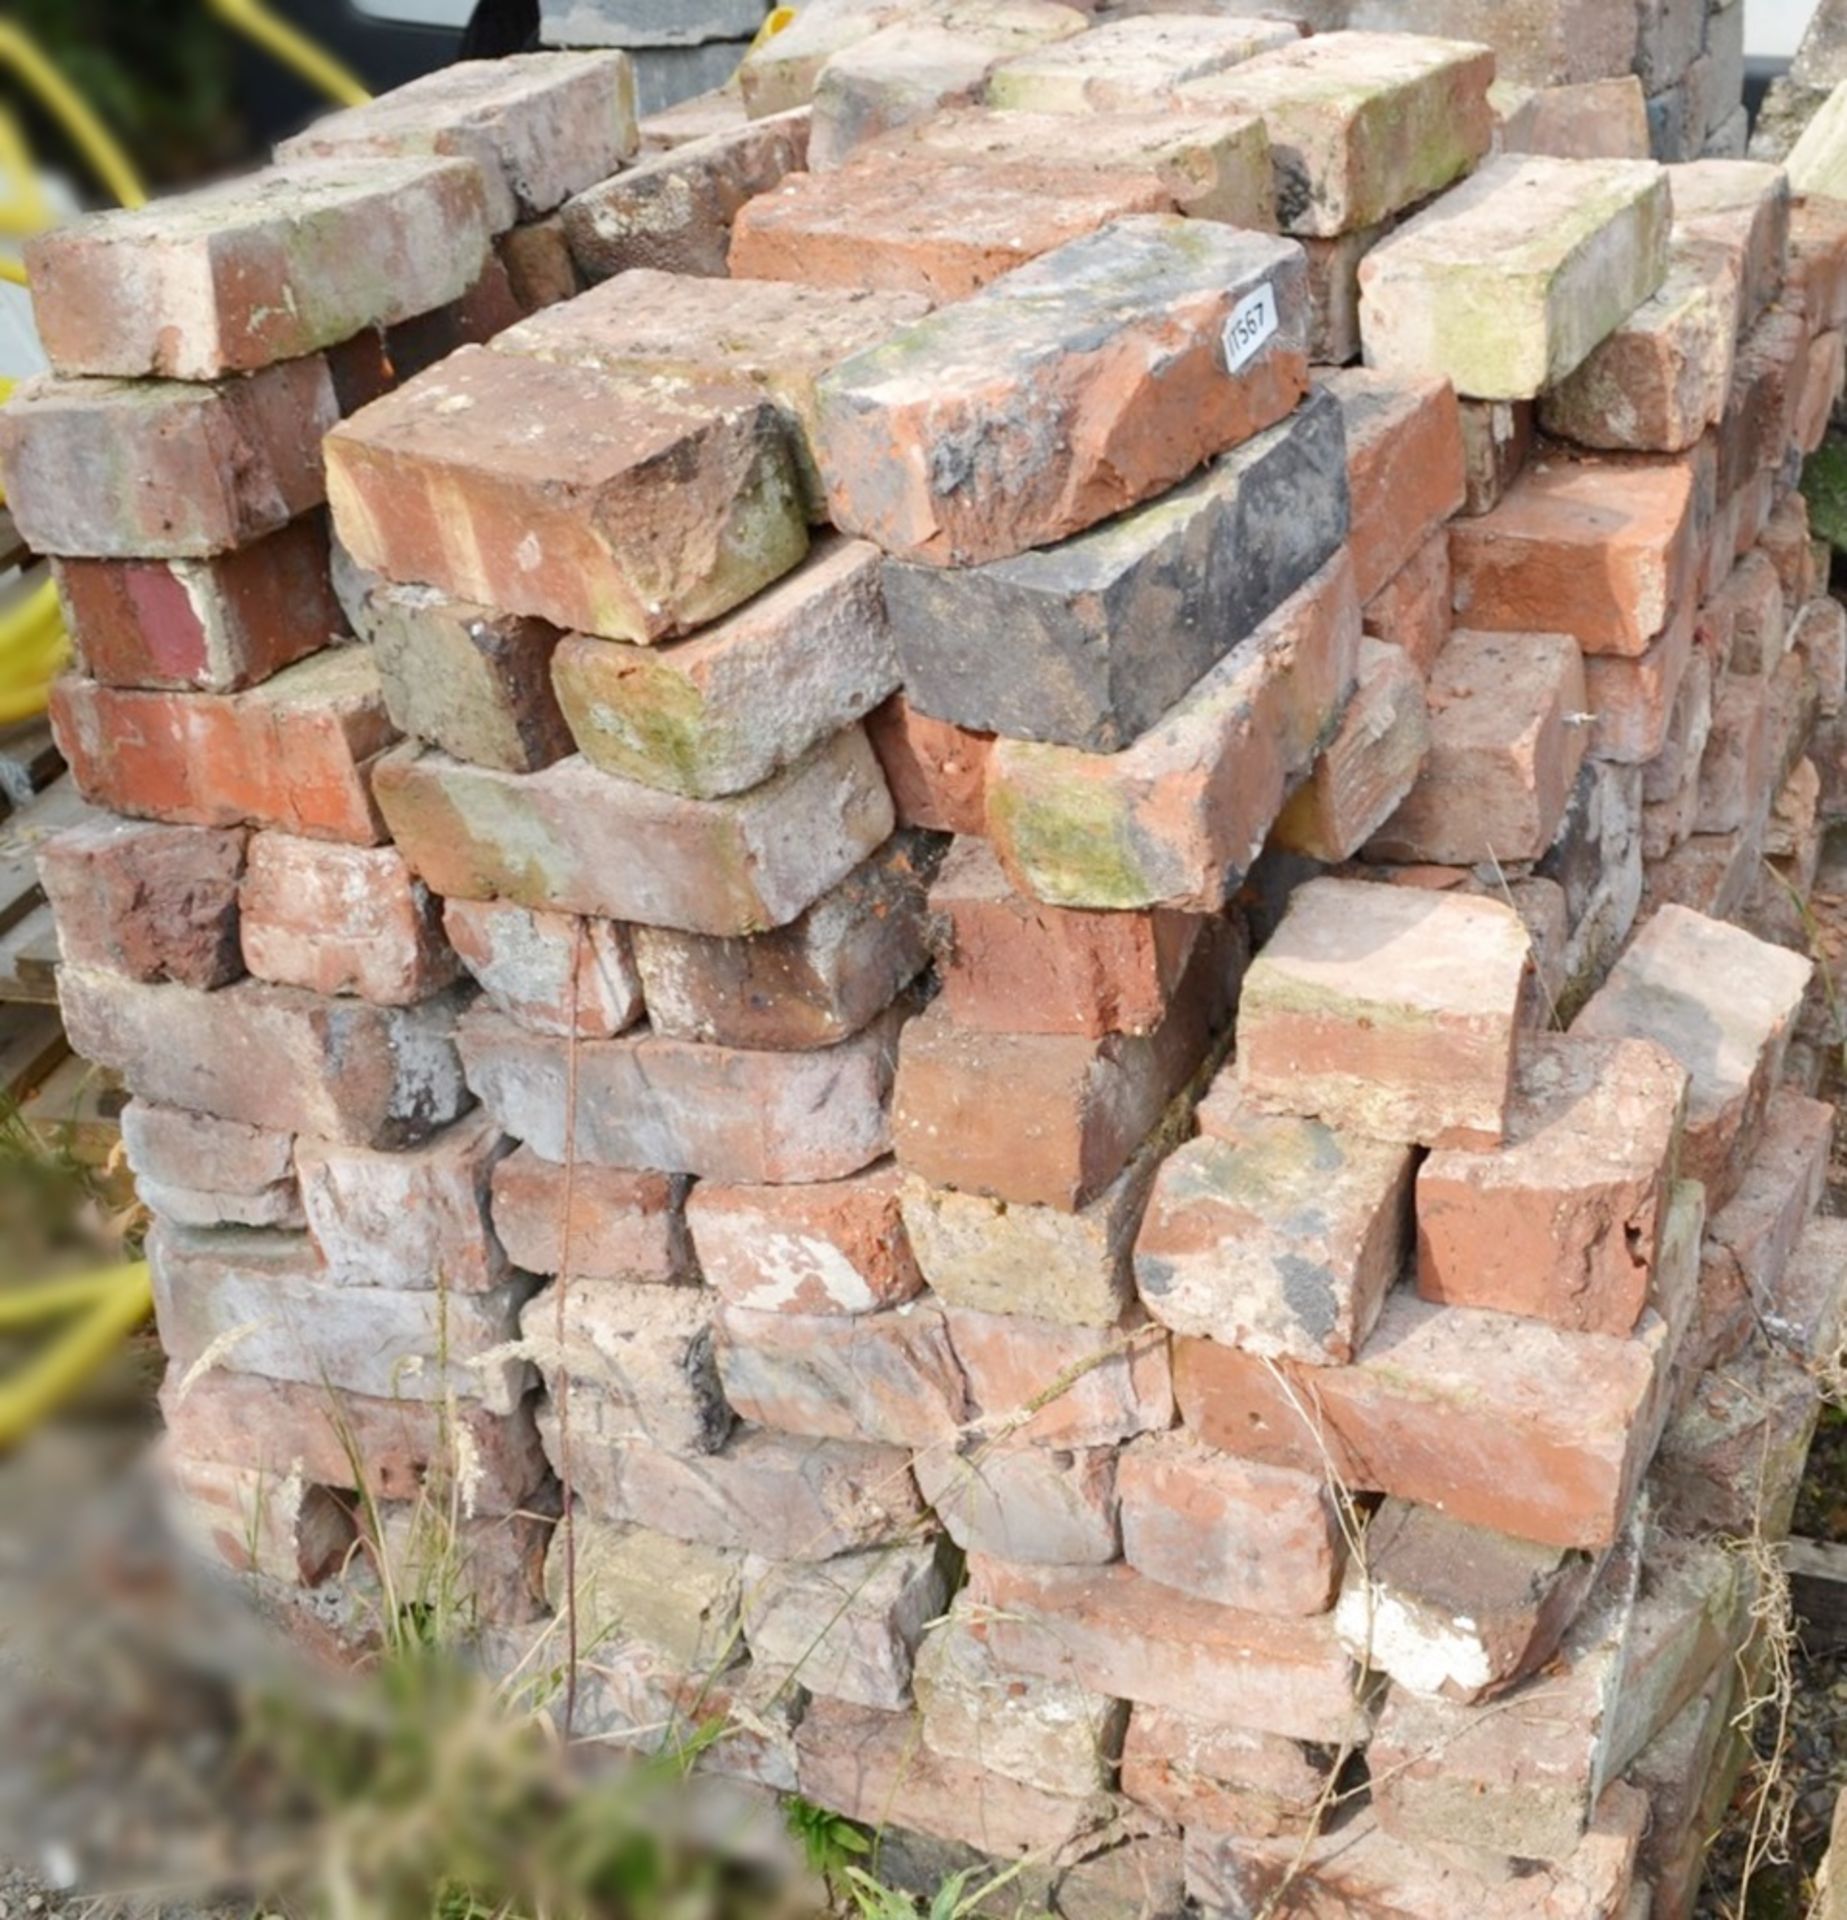 Assorted Reclaimed Hand Made Bricks - Approx 200 In Total - Average Dimensions: 22x11x7.5cm - Ref: - Image 3 of 3